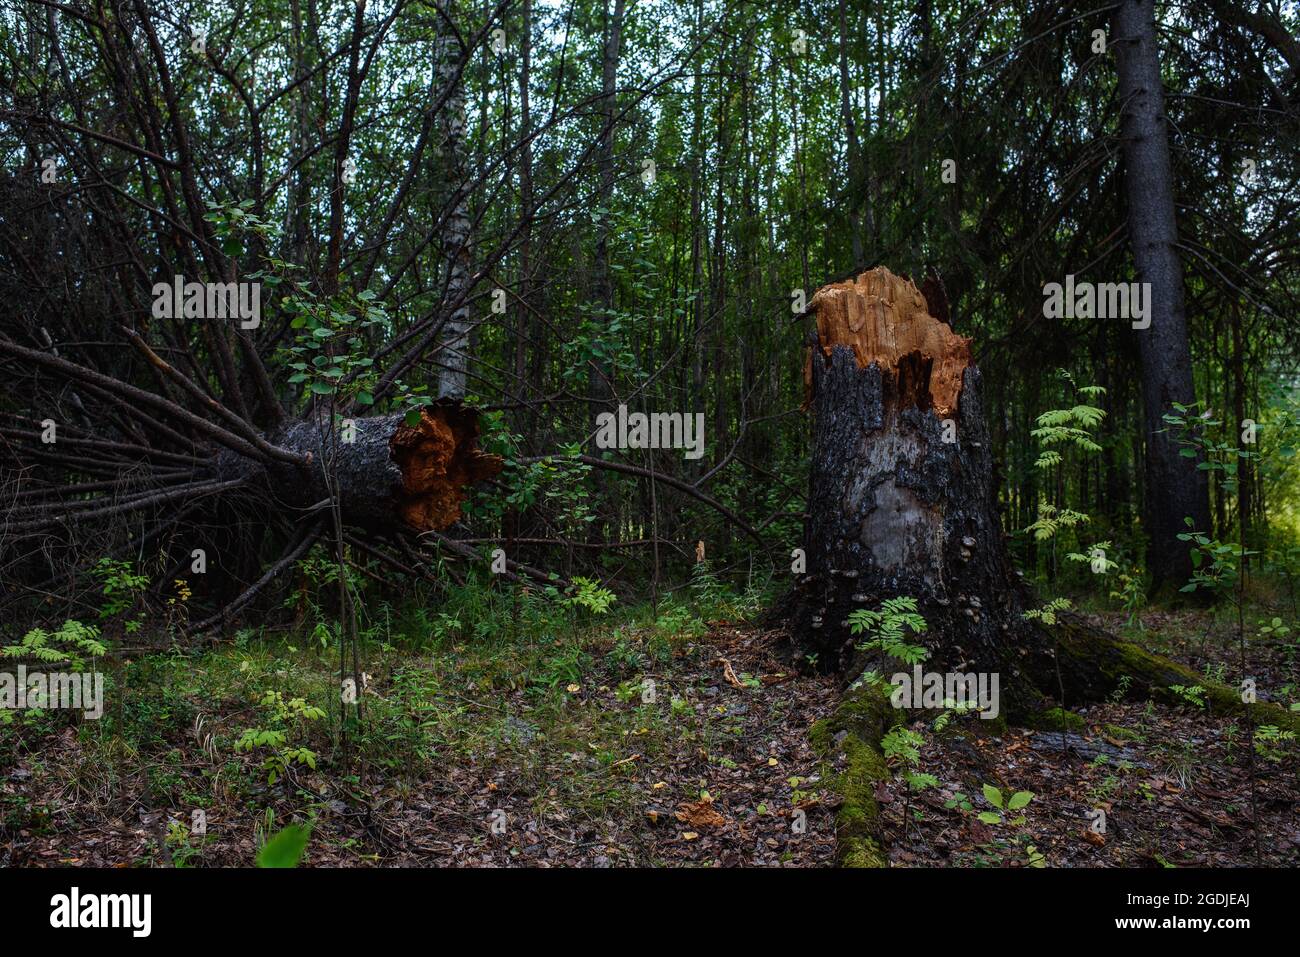 A tree fallen from old age in a dark forest before sunset. Stock Photo